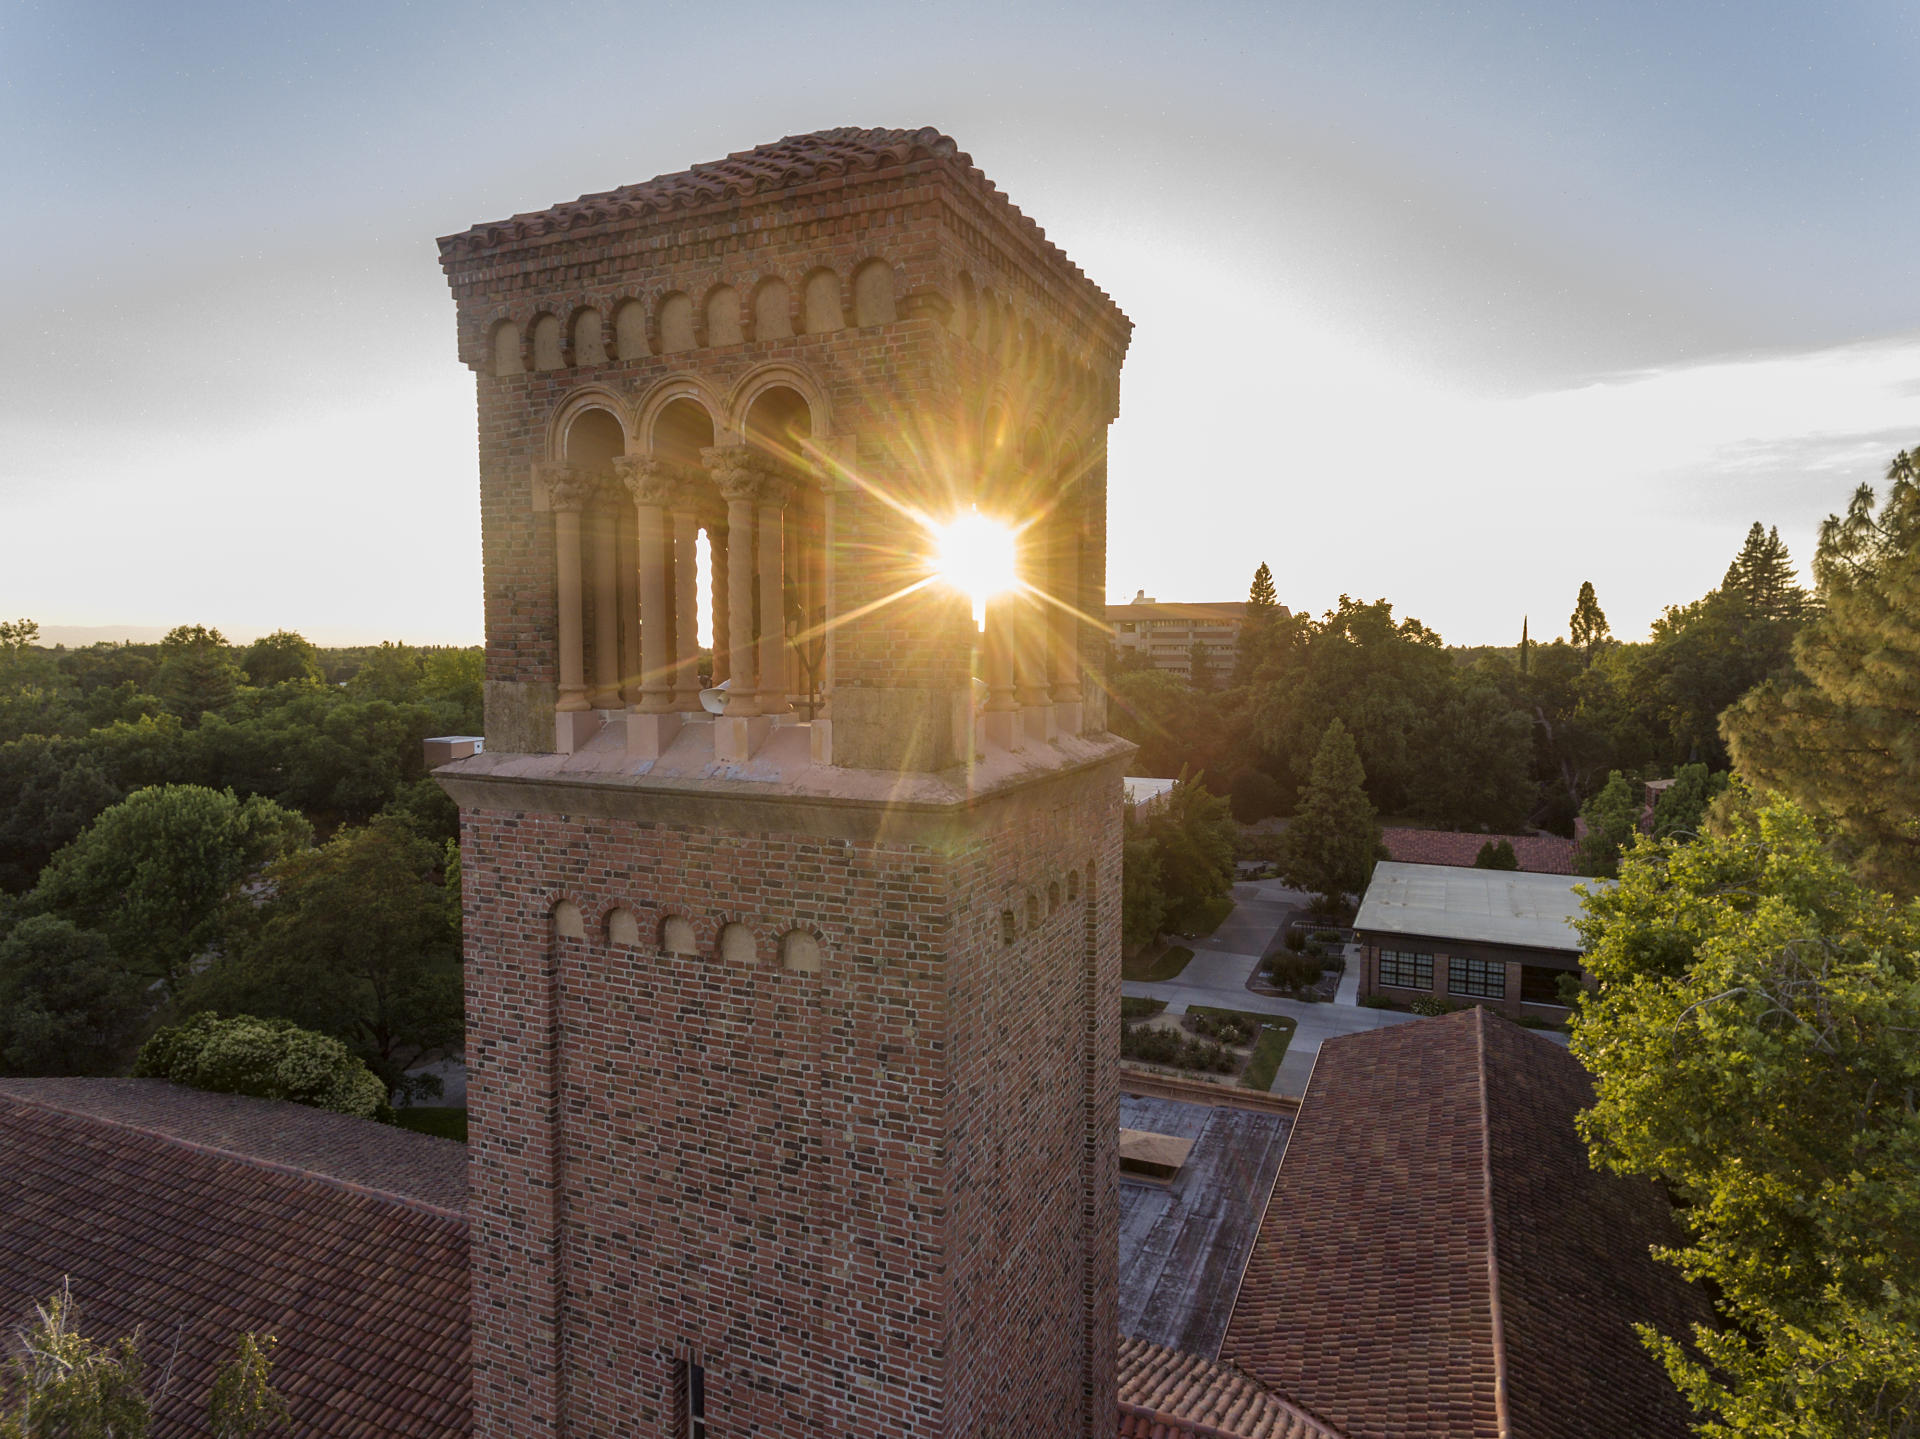 A drone photograph shows a late-spring sunset shining through Trinity Hall.